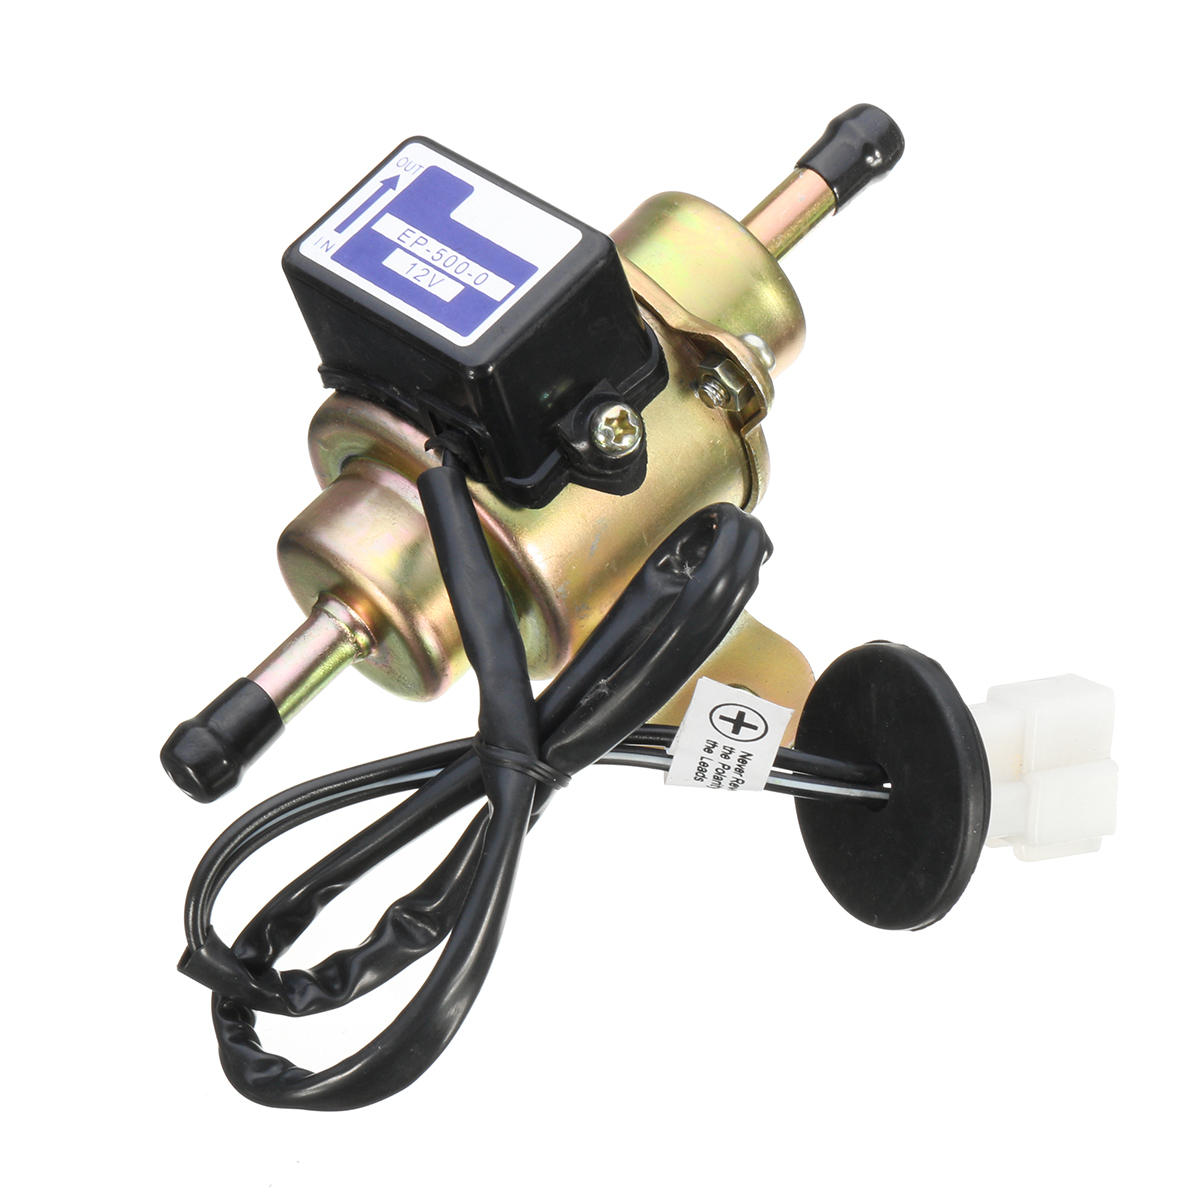 

12V Low Pressure Fuel Pump Petrol Gas Gasoline Diesel Electronic Replace EP 5000